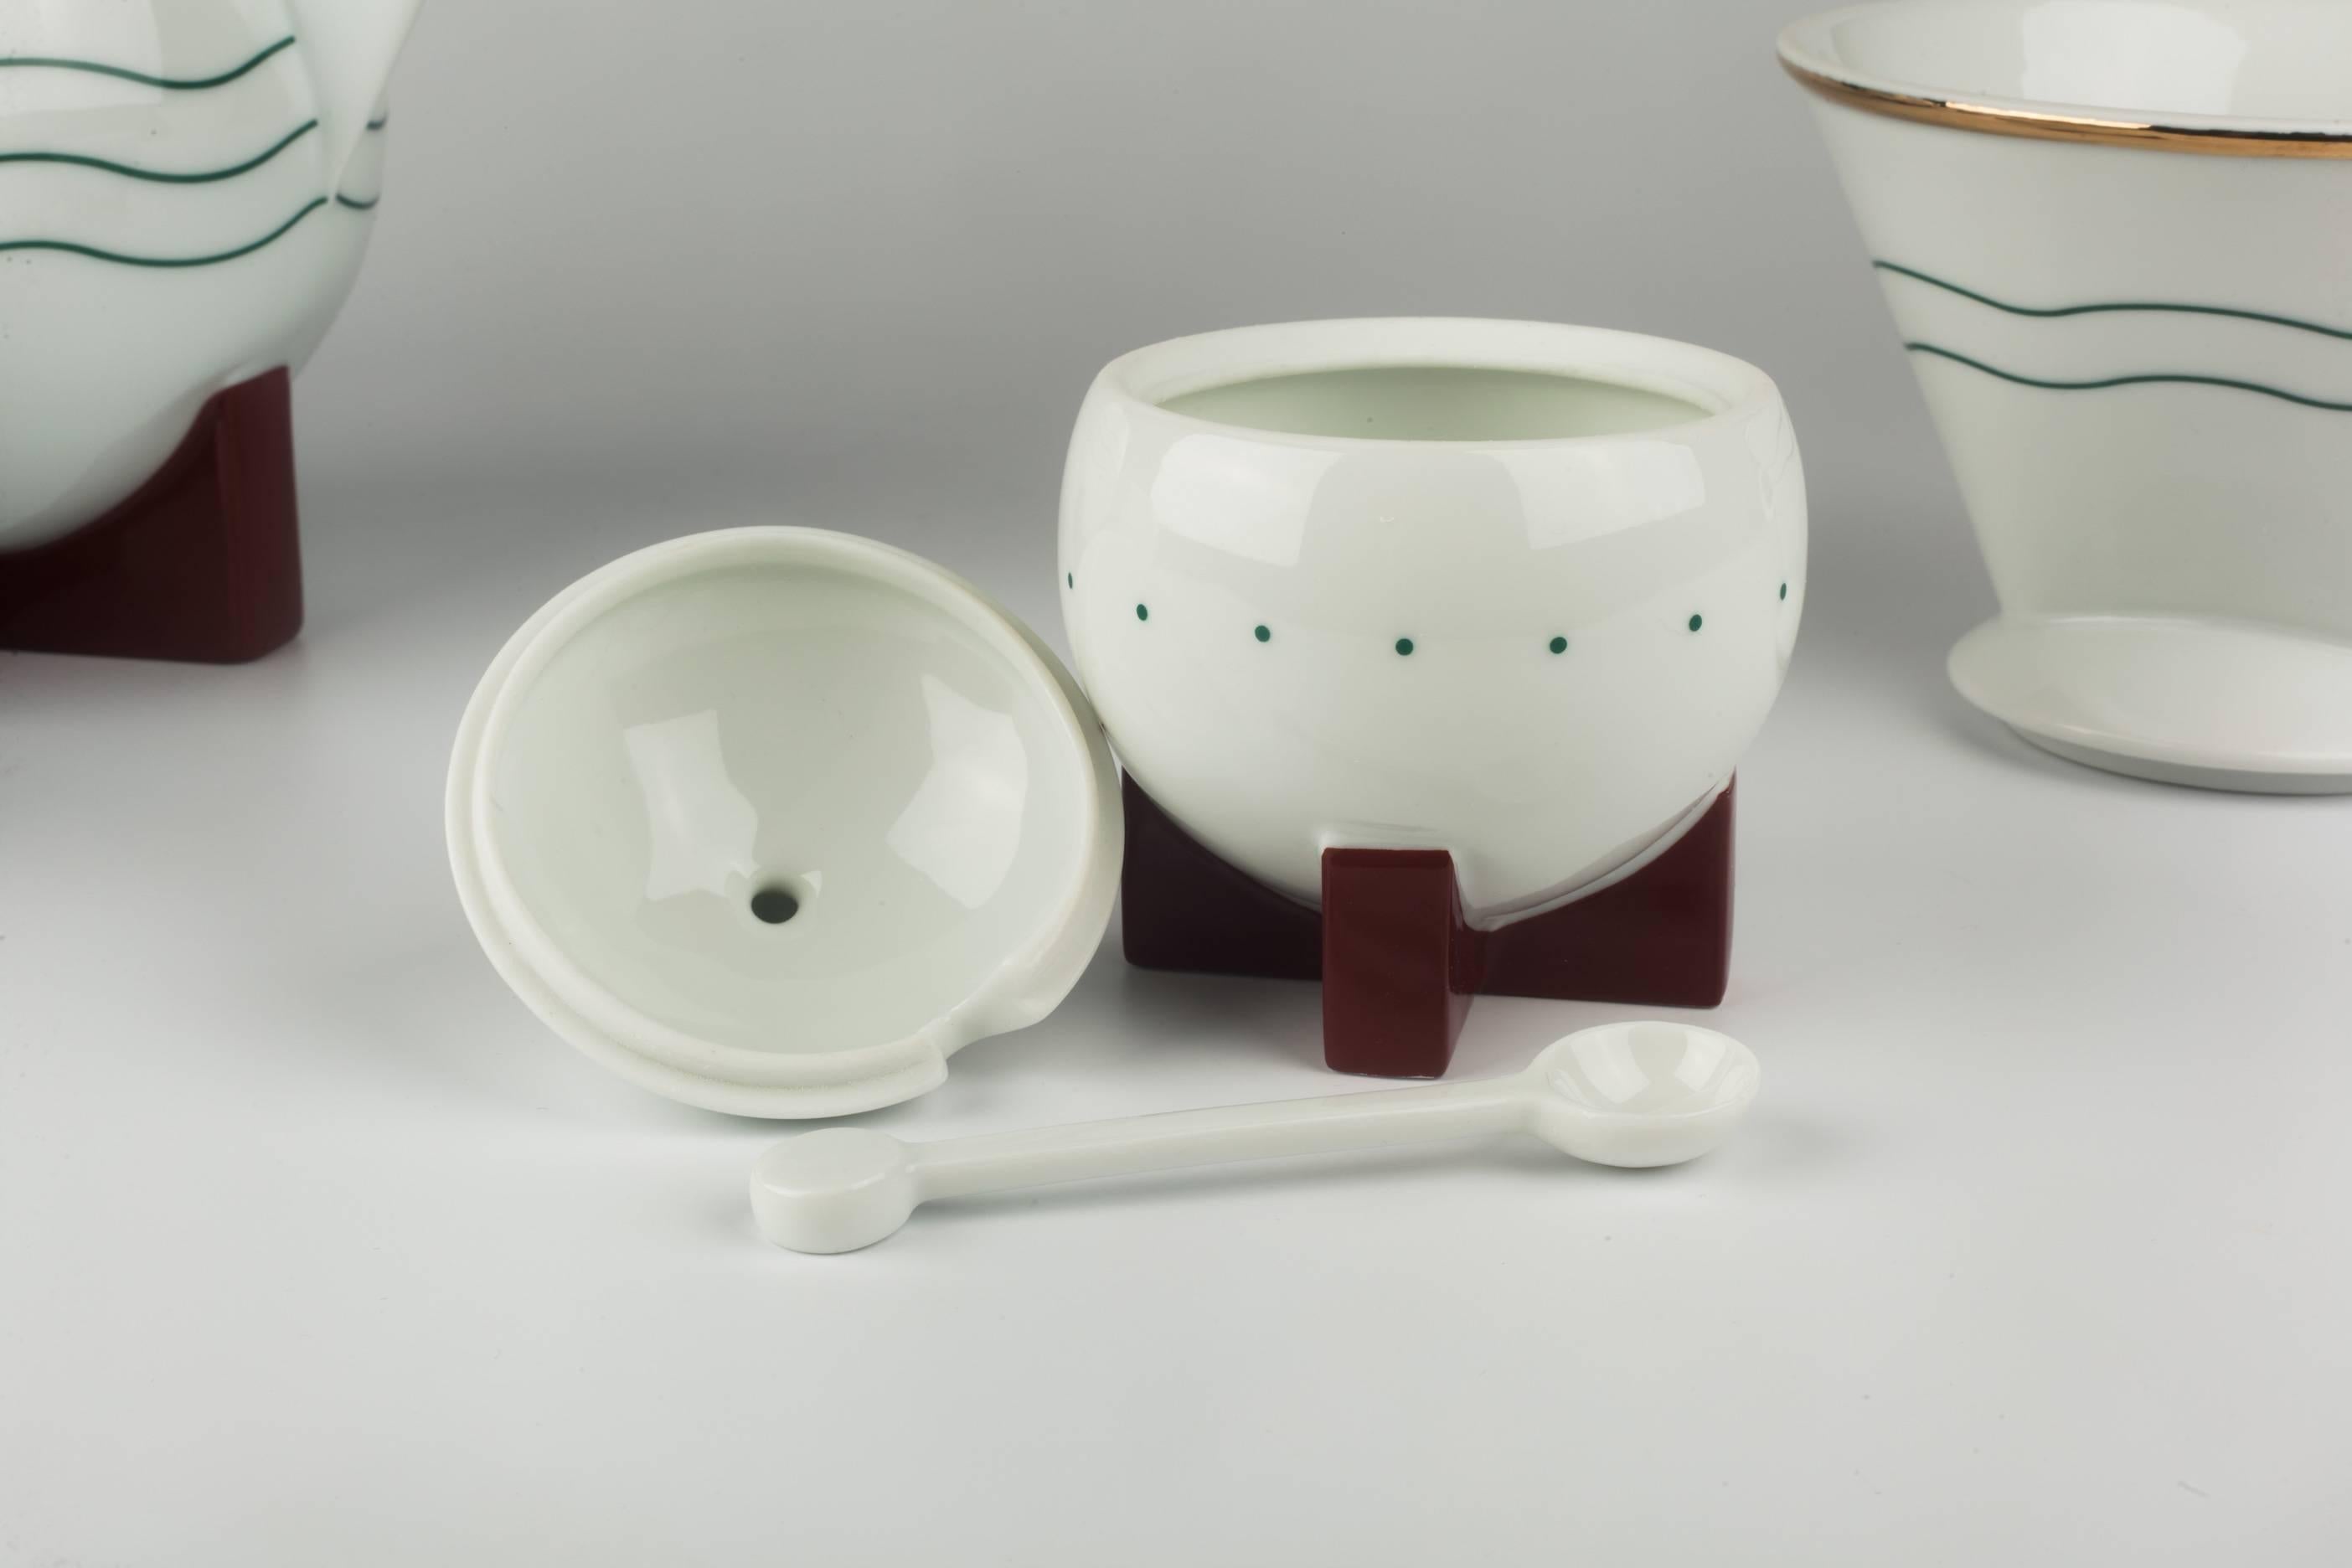 Porcelain Little Dripper Coffee Set by Michael Graves for Swid Powell, USA, 1987